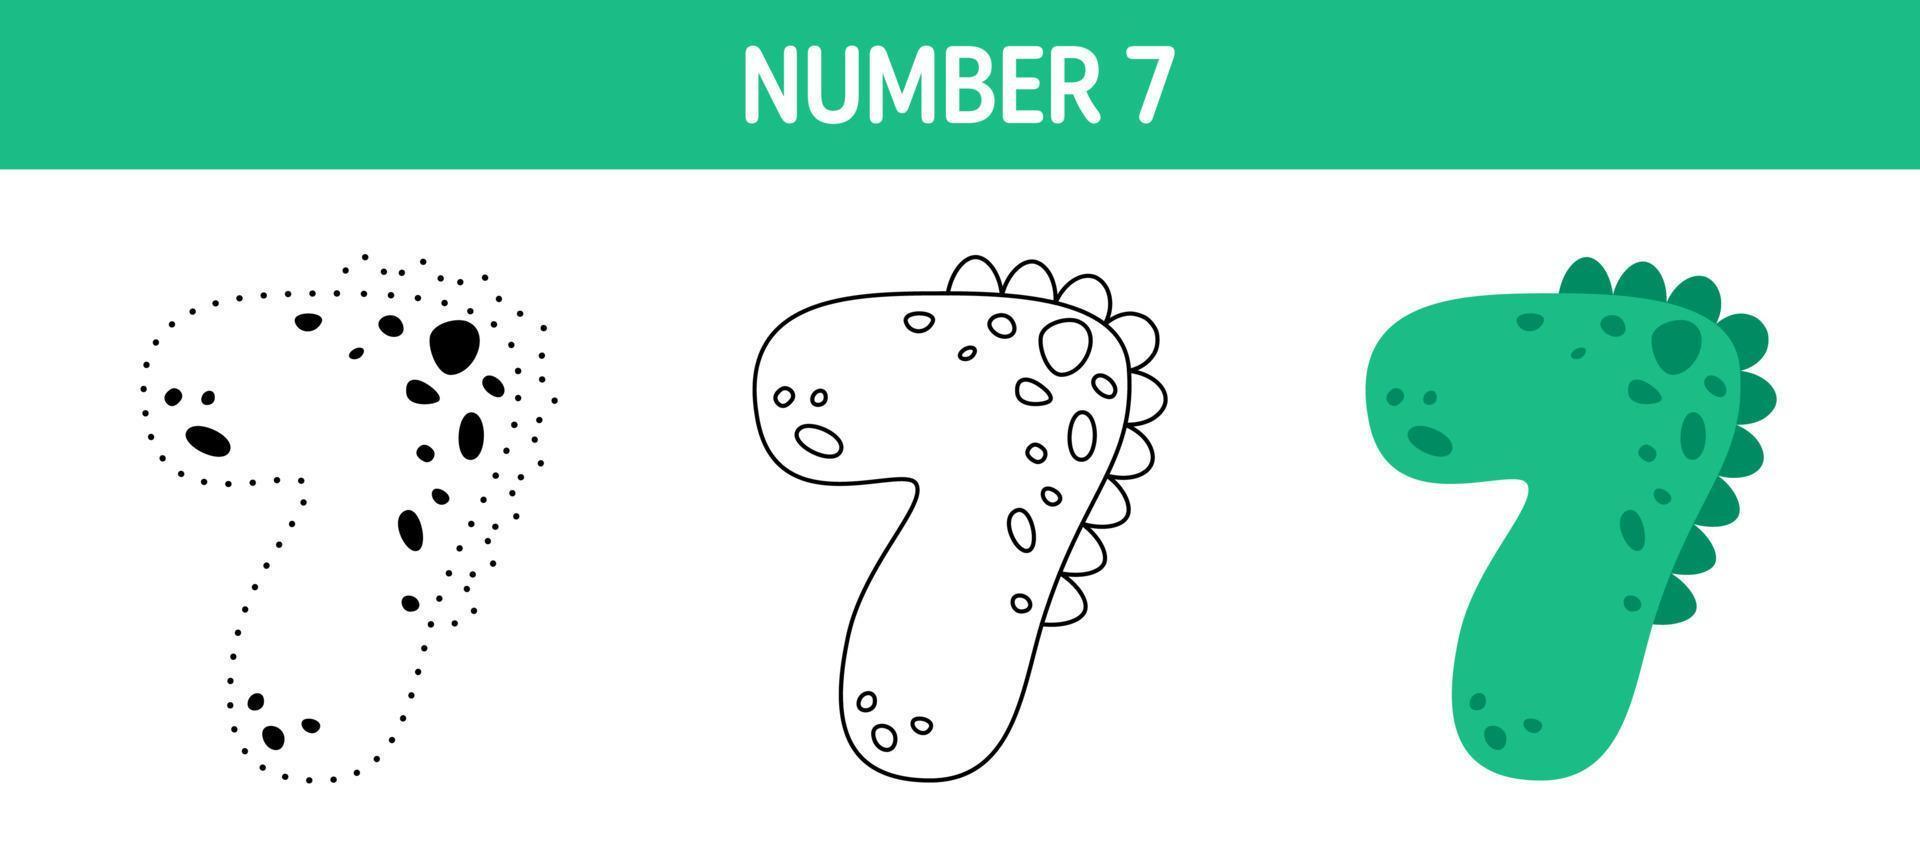 Number 7 tracing and coloring worksheet for kids vector